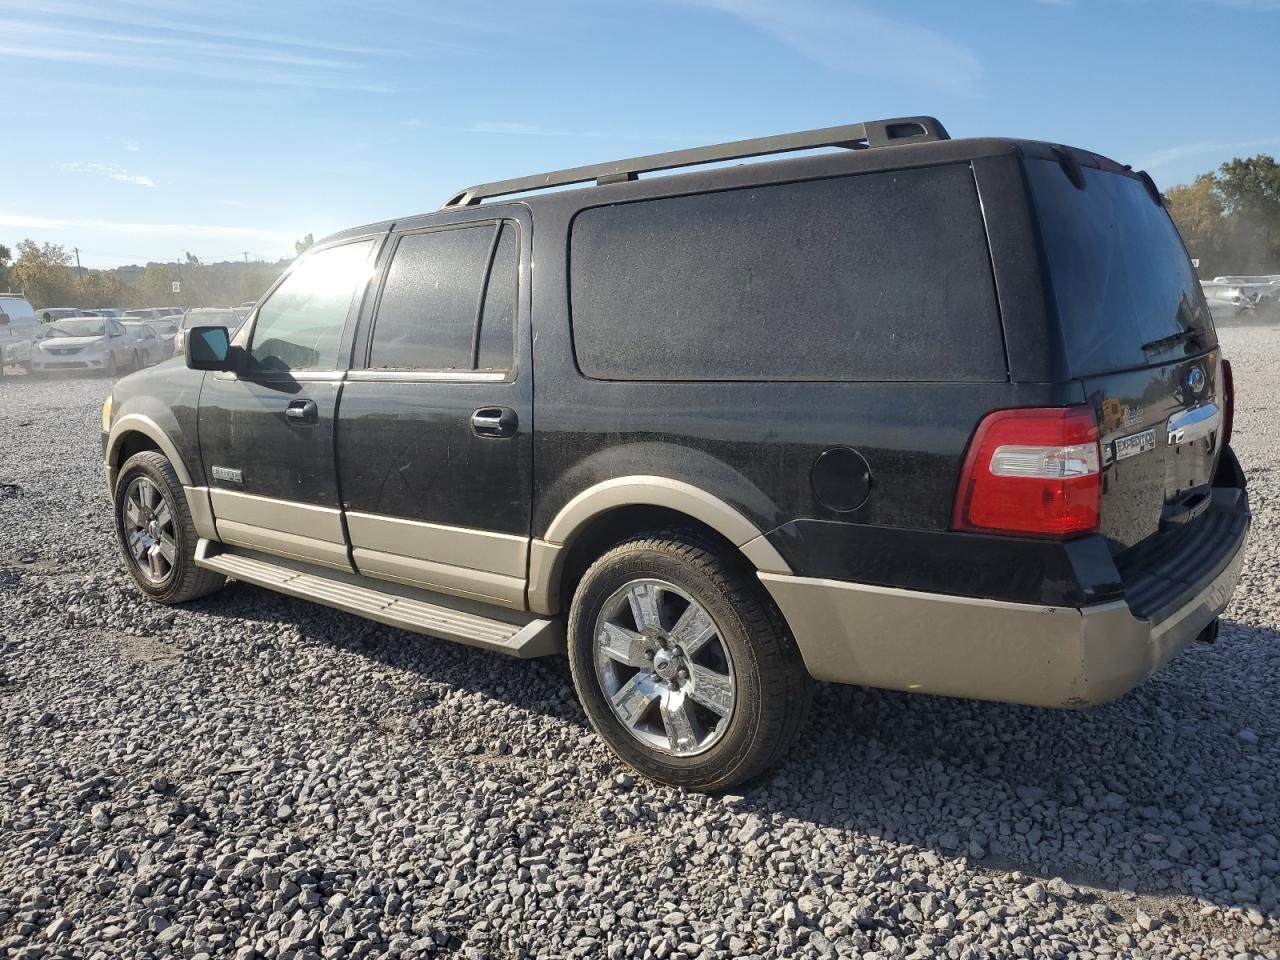 1FMFK17587L****** Used and Repairable 2007 Ford Expedition in AL - Hueytown